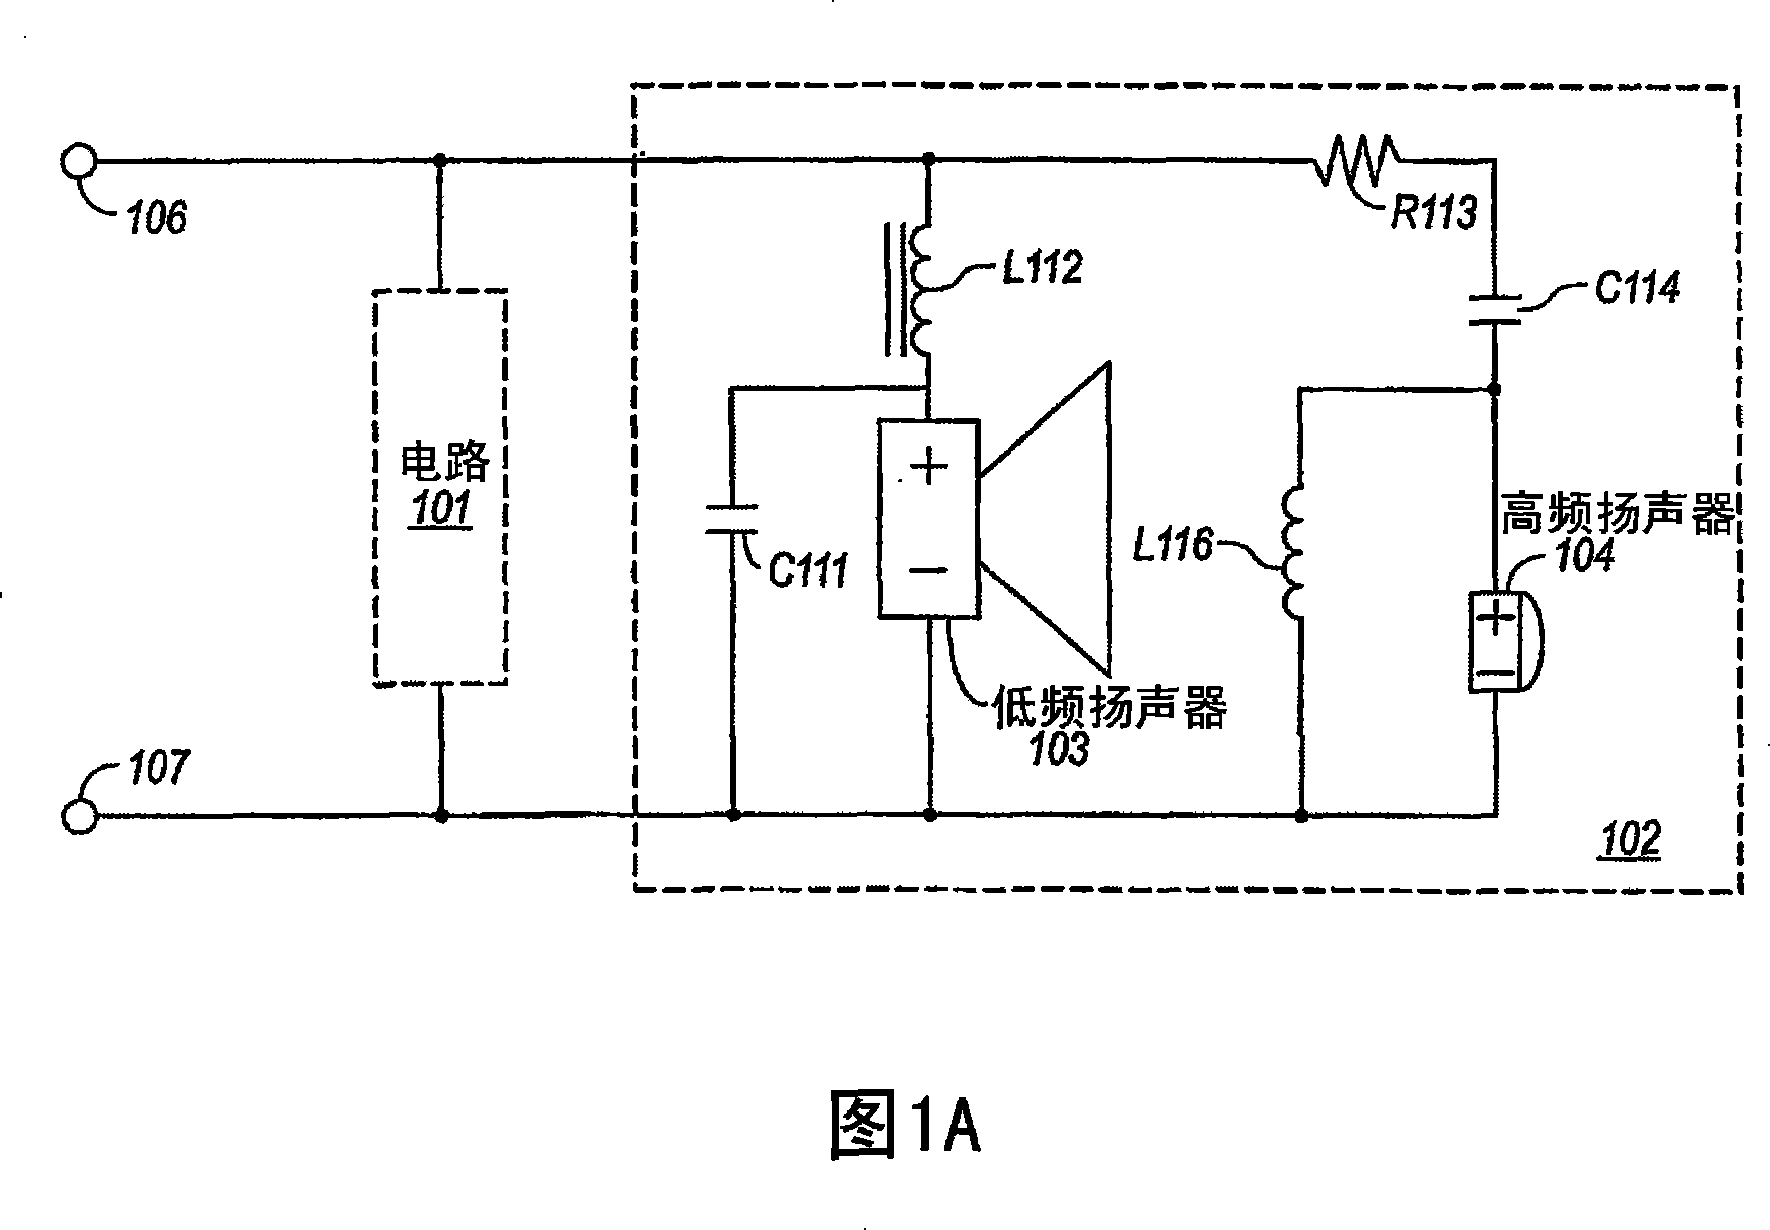 Crossover circuit for reducing impedance response variance of a speaker